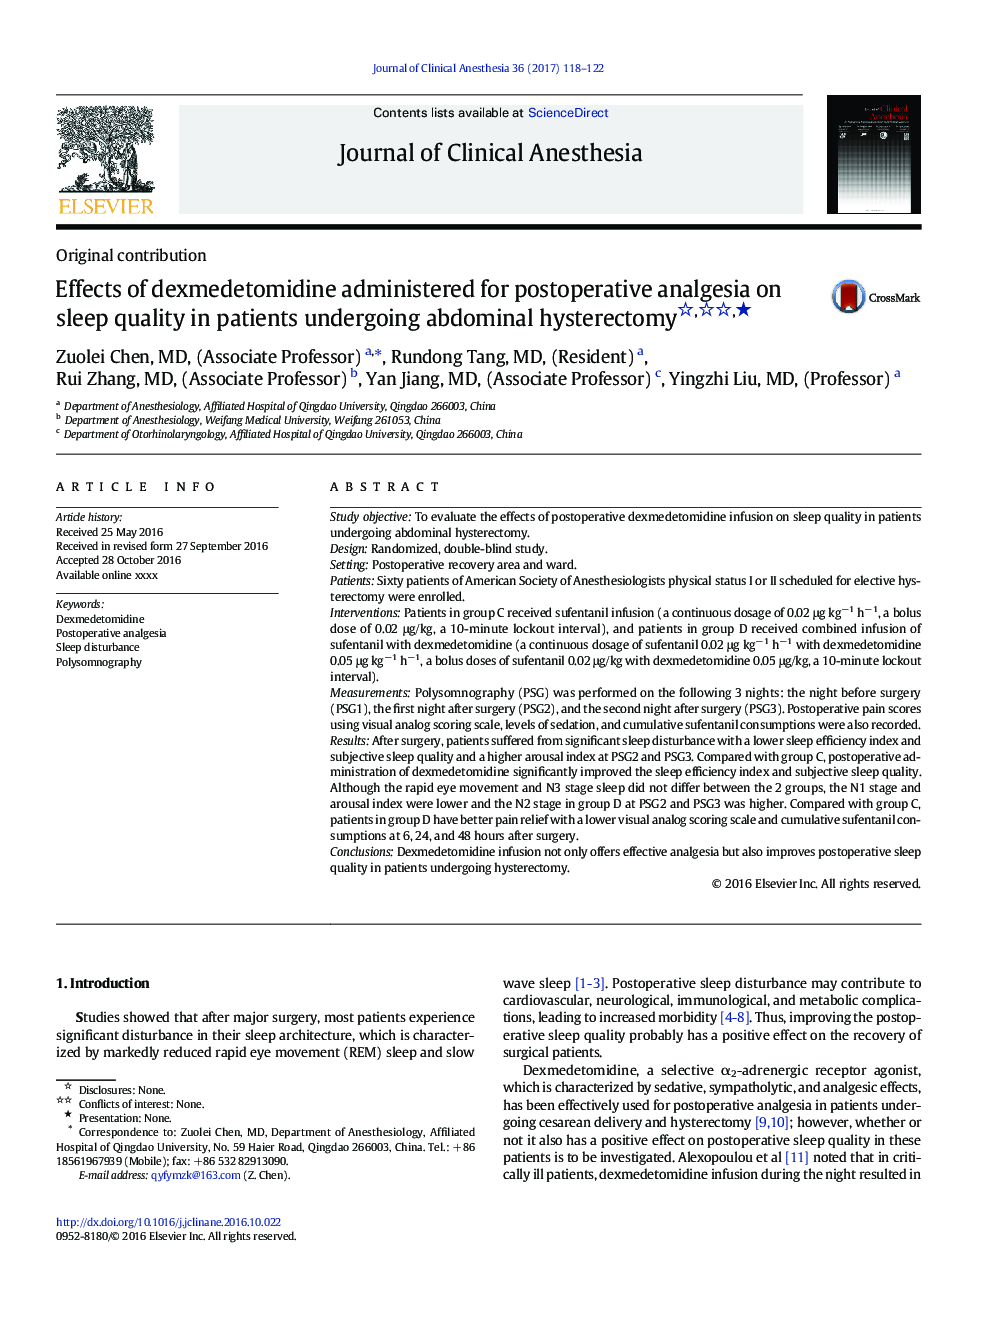 Effects of dexmedetomidine administered for postoperative analgesia on sleep quality in patients undergoing abdominal hysterectomy